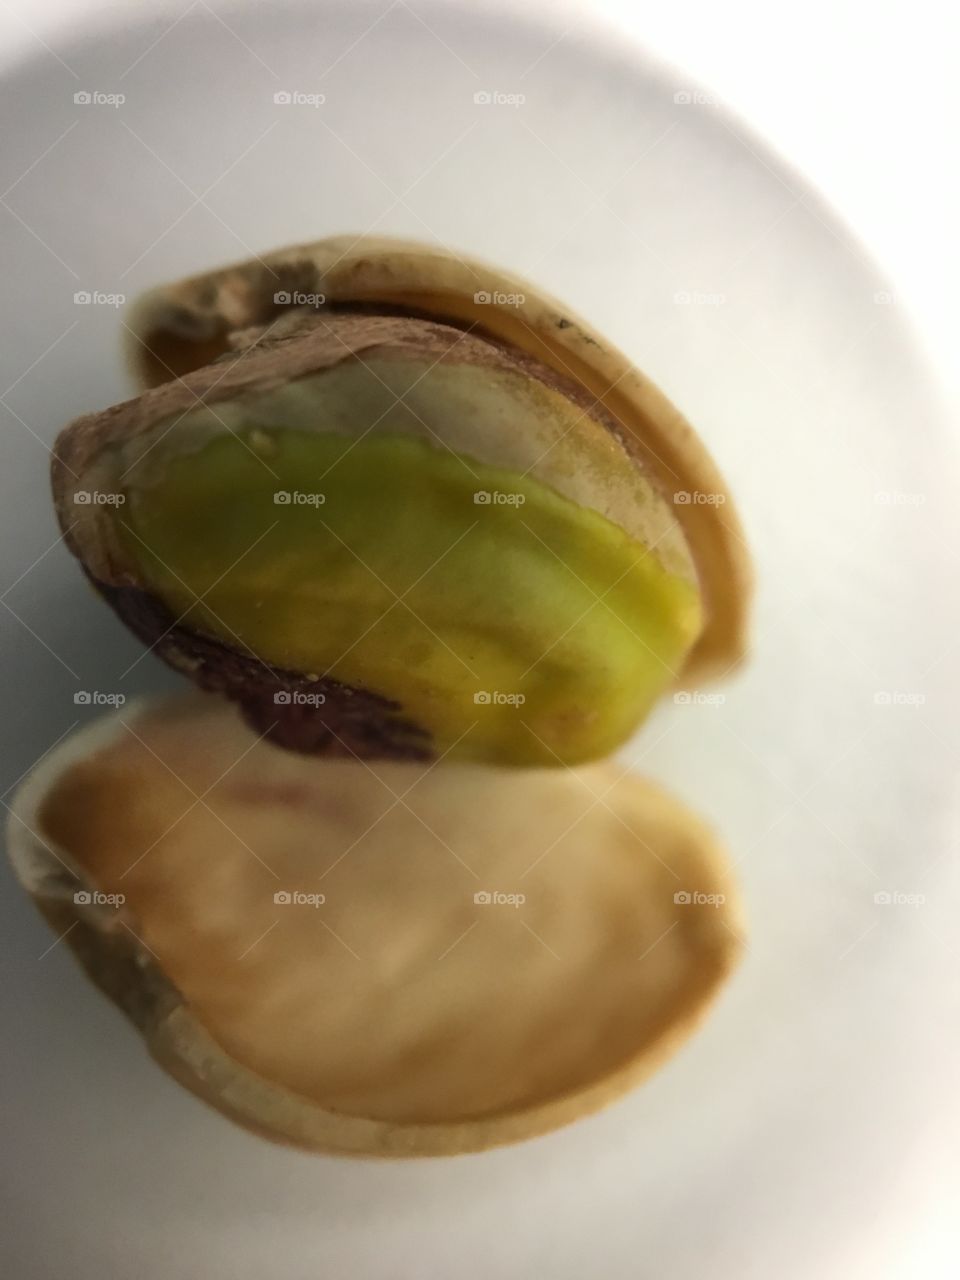 Single pistachio nut with its shell. Close up on the green nut. 